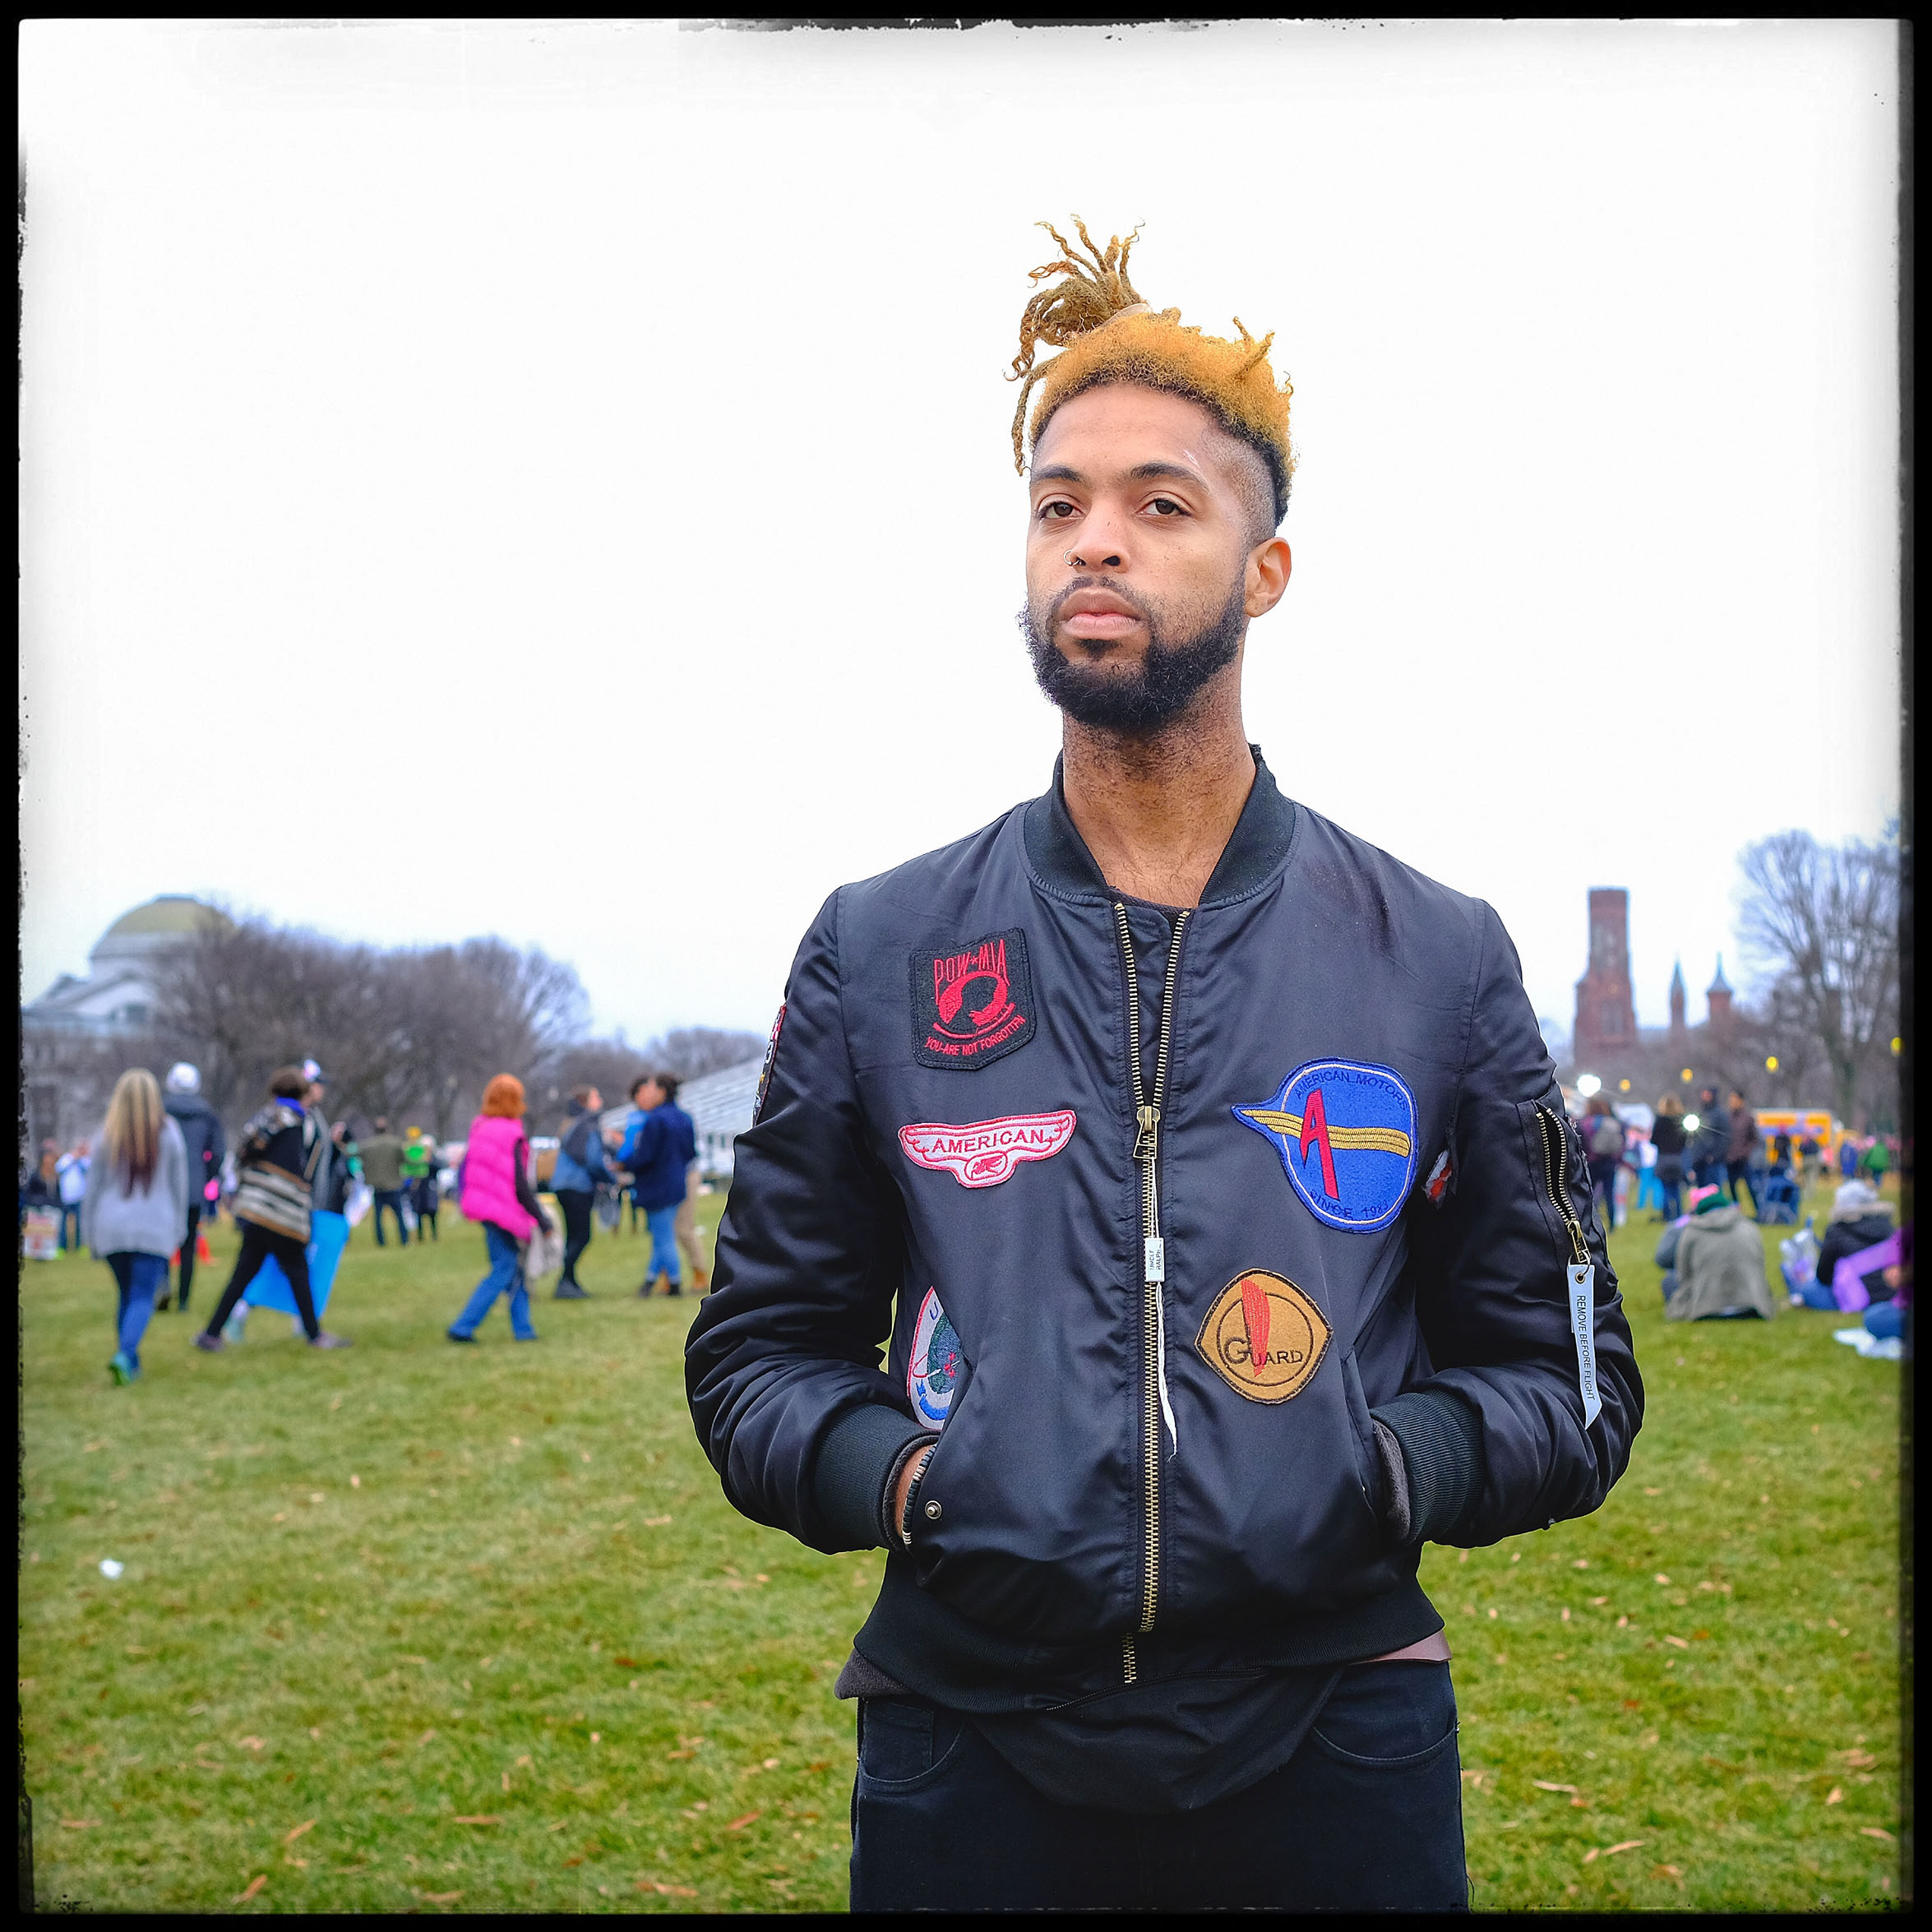 Andrew ("Woods"), 27, is a D.C. resident: "I came here to march against a toxic masculinity and years of misogyny. After all, I got six sisters. I had to do this."